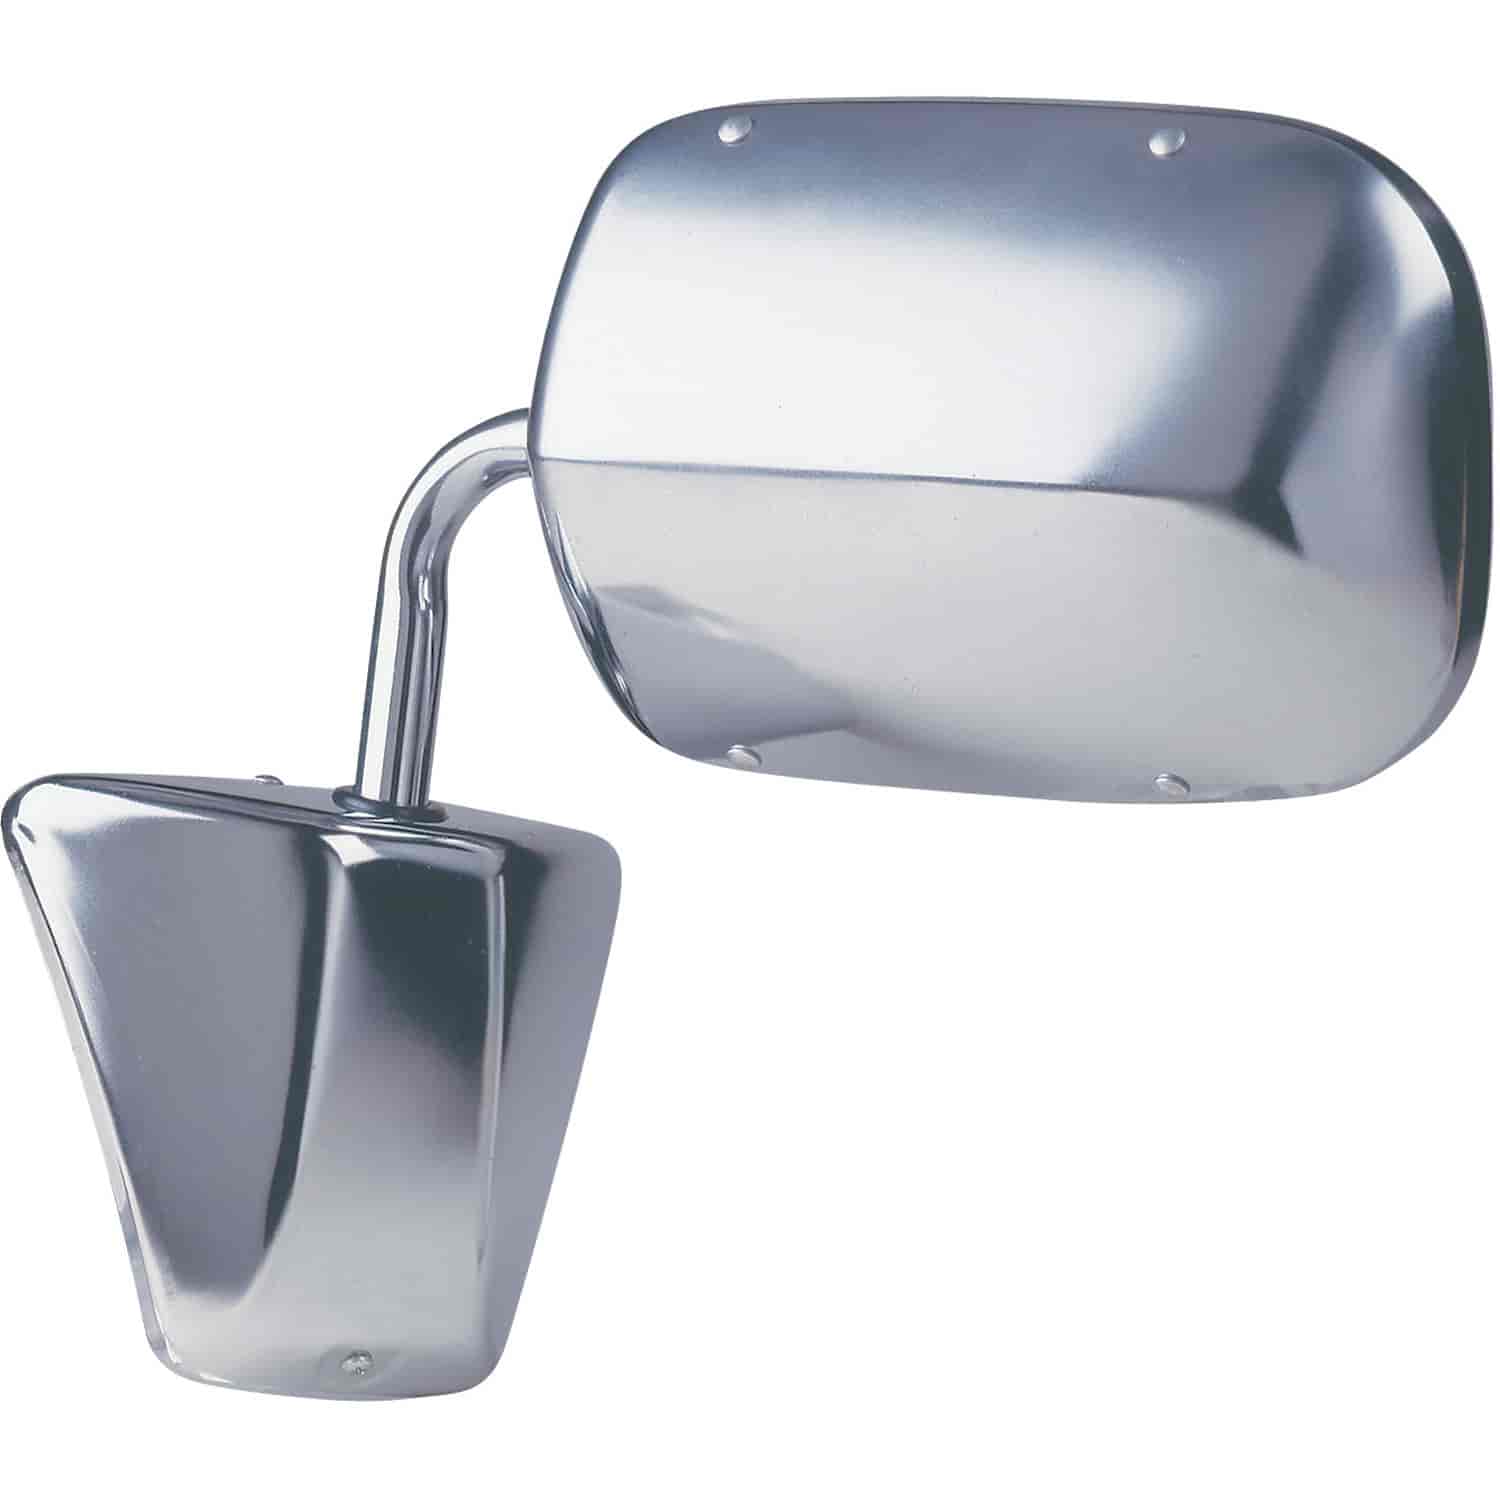 OEM Style Chrome Replacement Mirror for 1978-1991 Blazer/ Jimmy/ Suburban 1973-1987 Full-Size Pickup